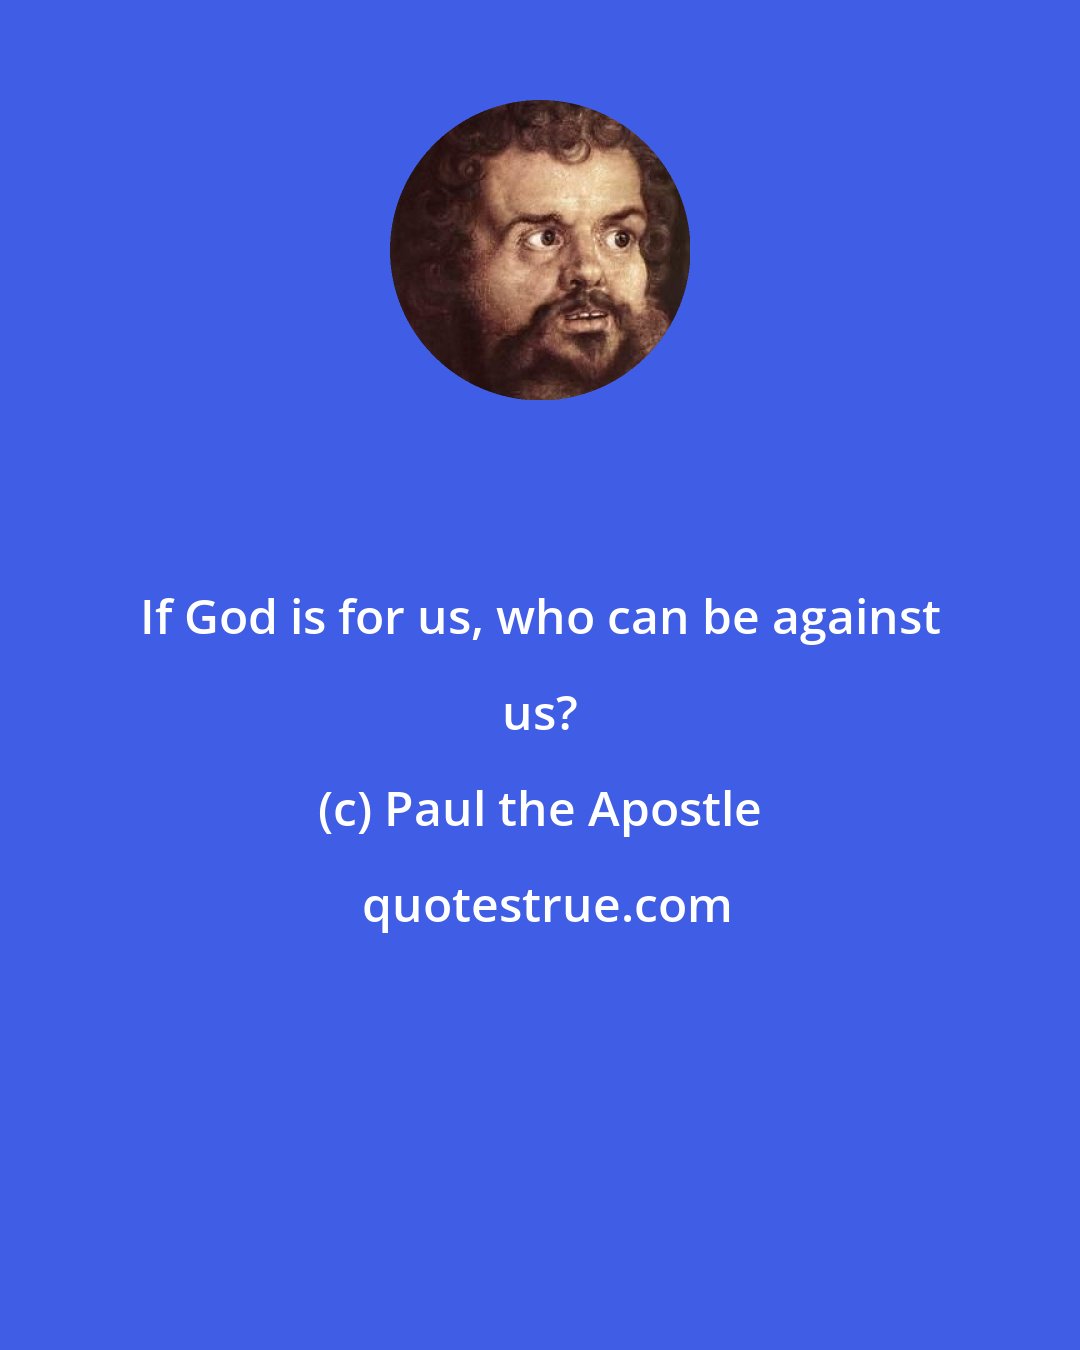 Paul the Apostle: If God is for us, who can be against us?